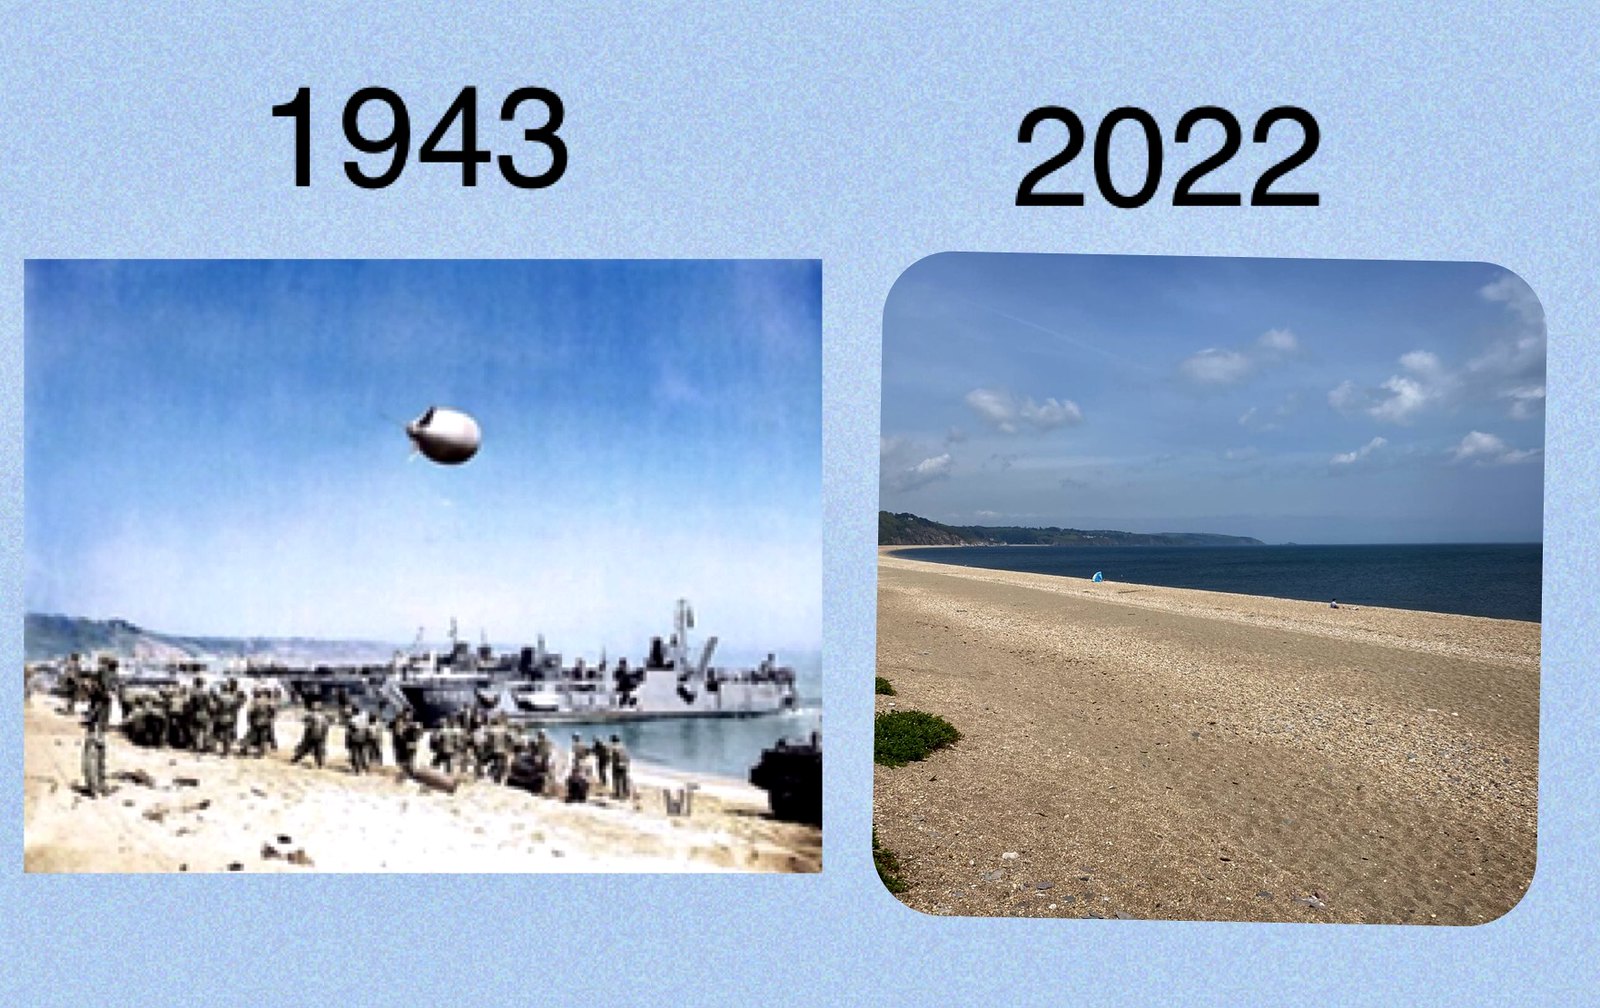 Exercise Tiger- Slapton Sands, then and now